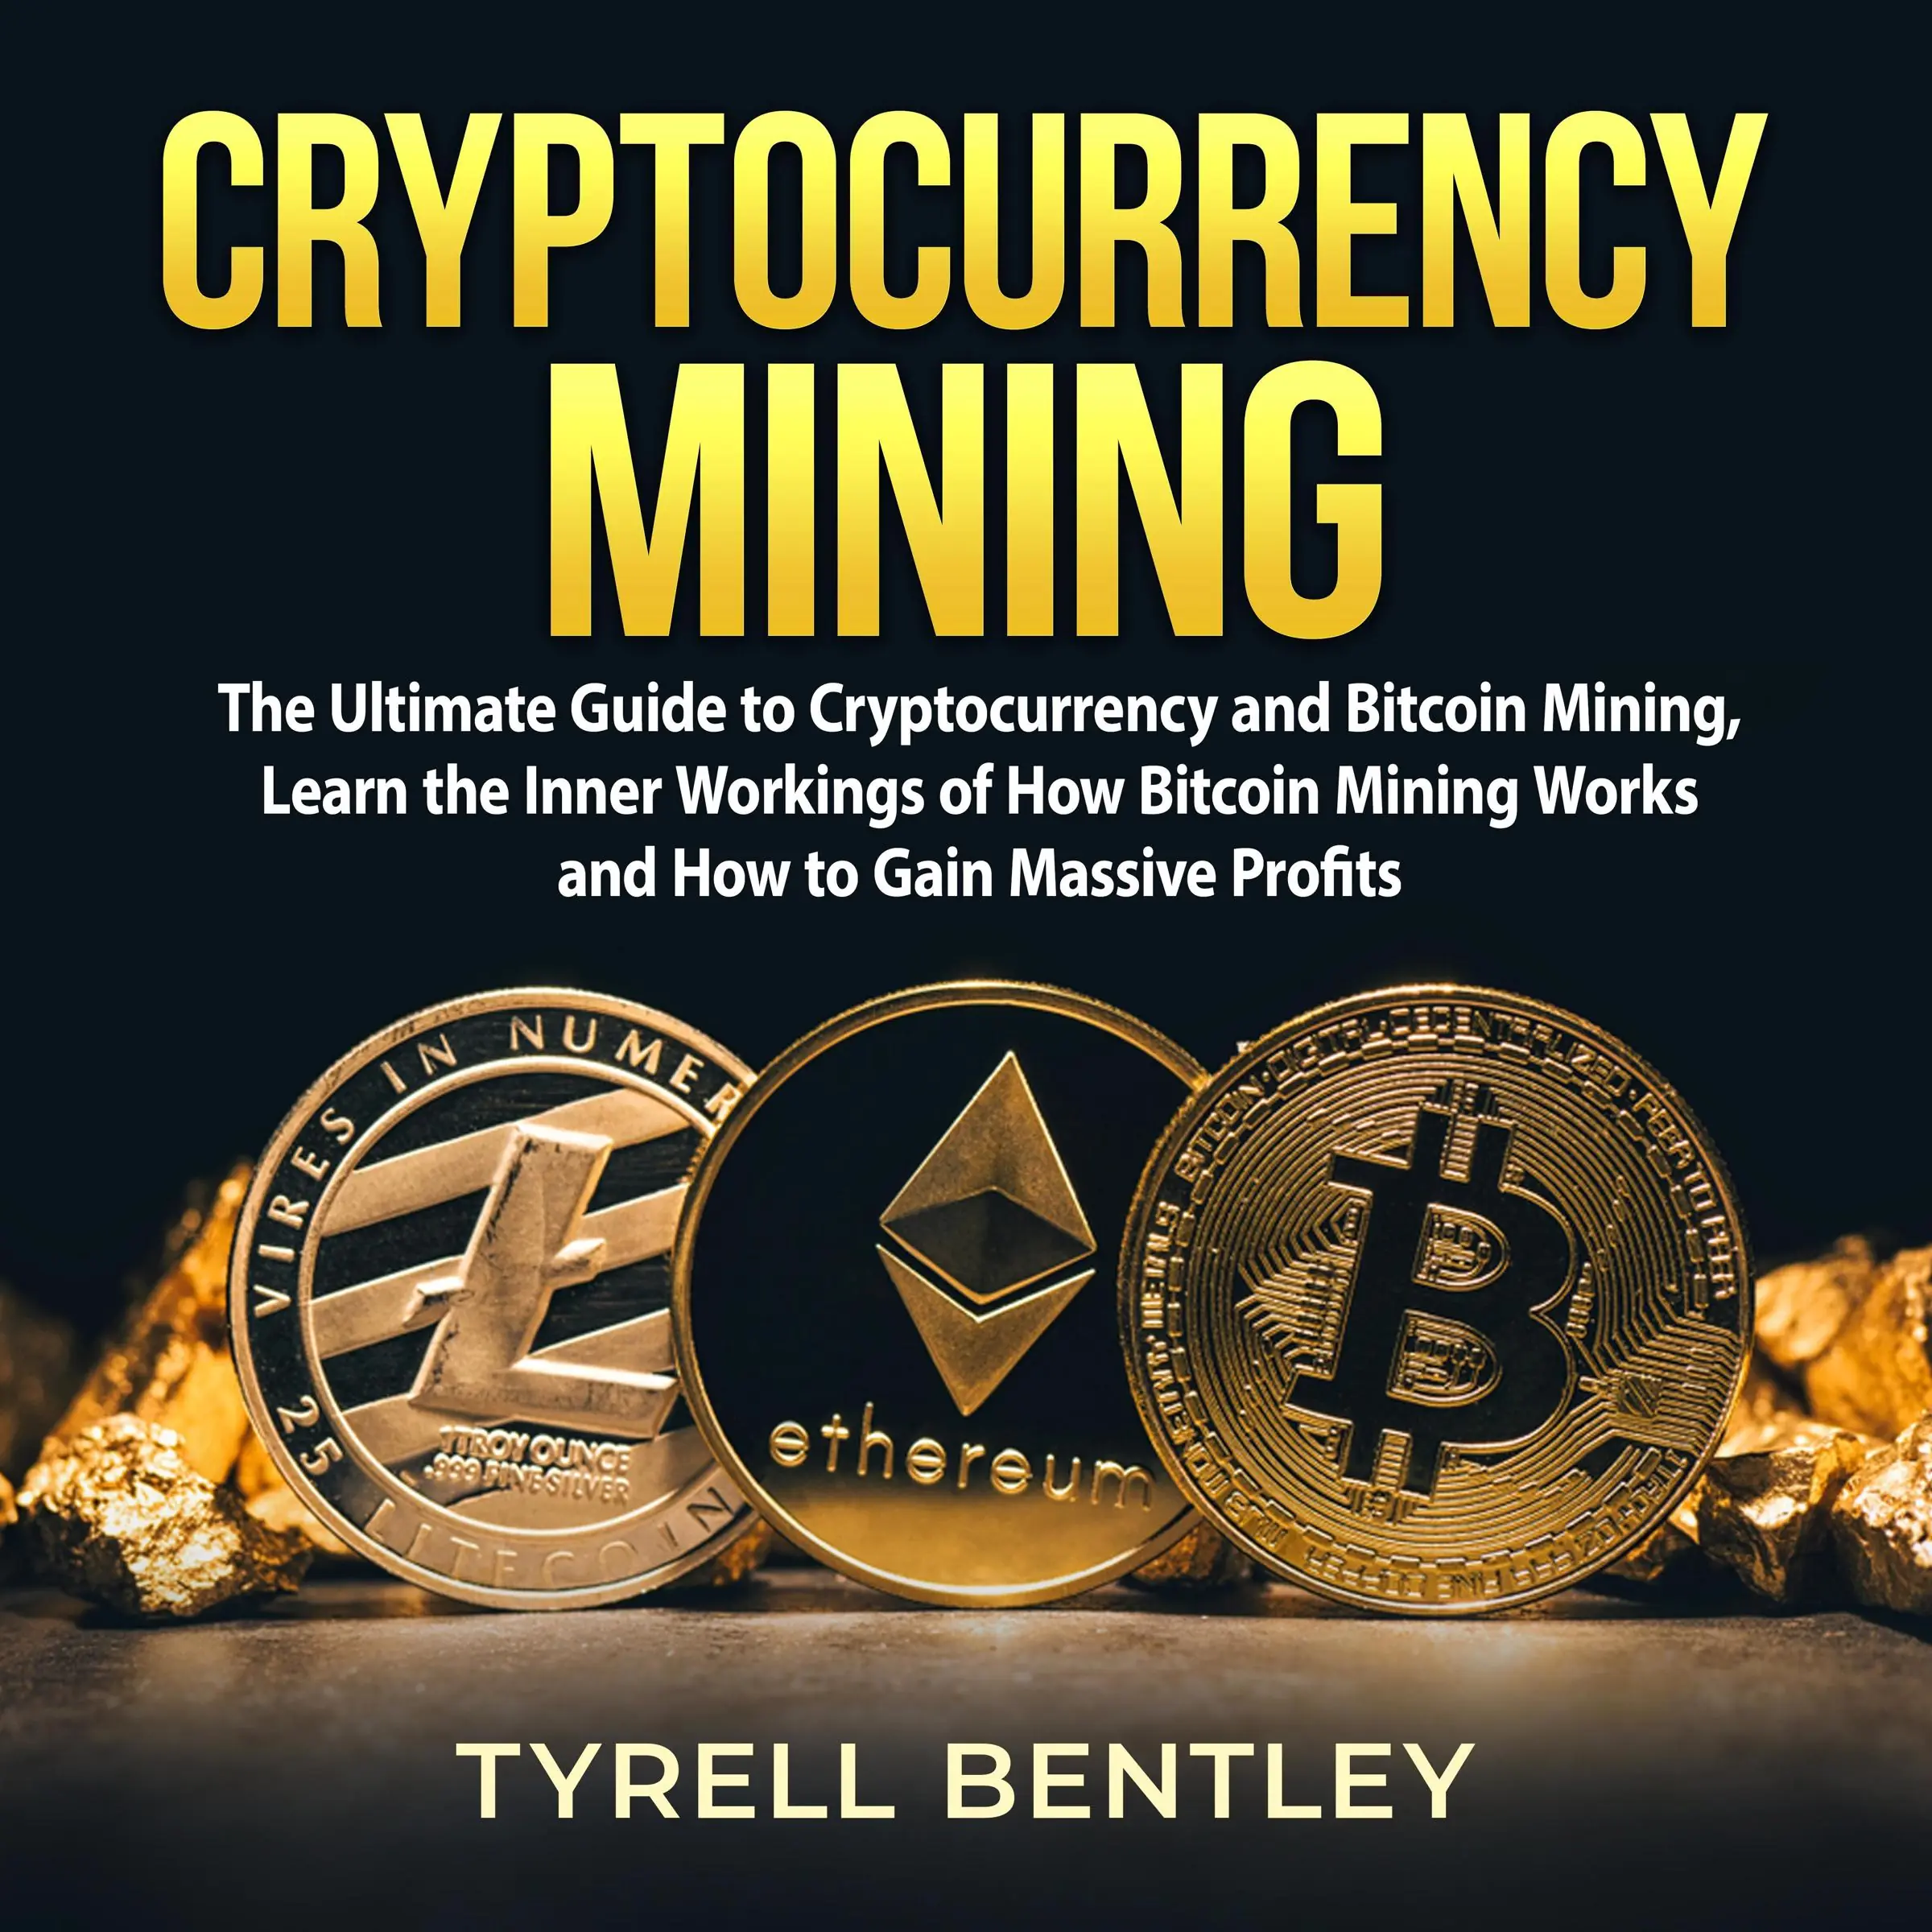 Cryptocurrency Mining: The Ultimate Guide to Cryptocurrency and Bitcoin Mining, Learn the Inner Workings of How Bitcoin Mining Works and How to Gain Massive Profits by Tyrell Bentley Audiobook